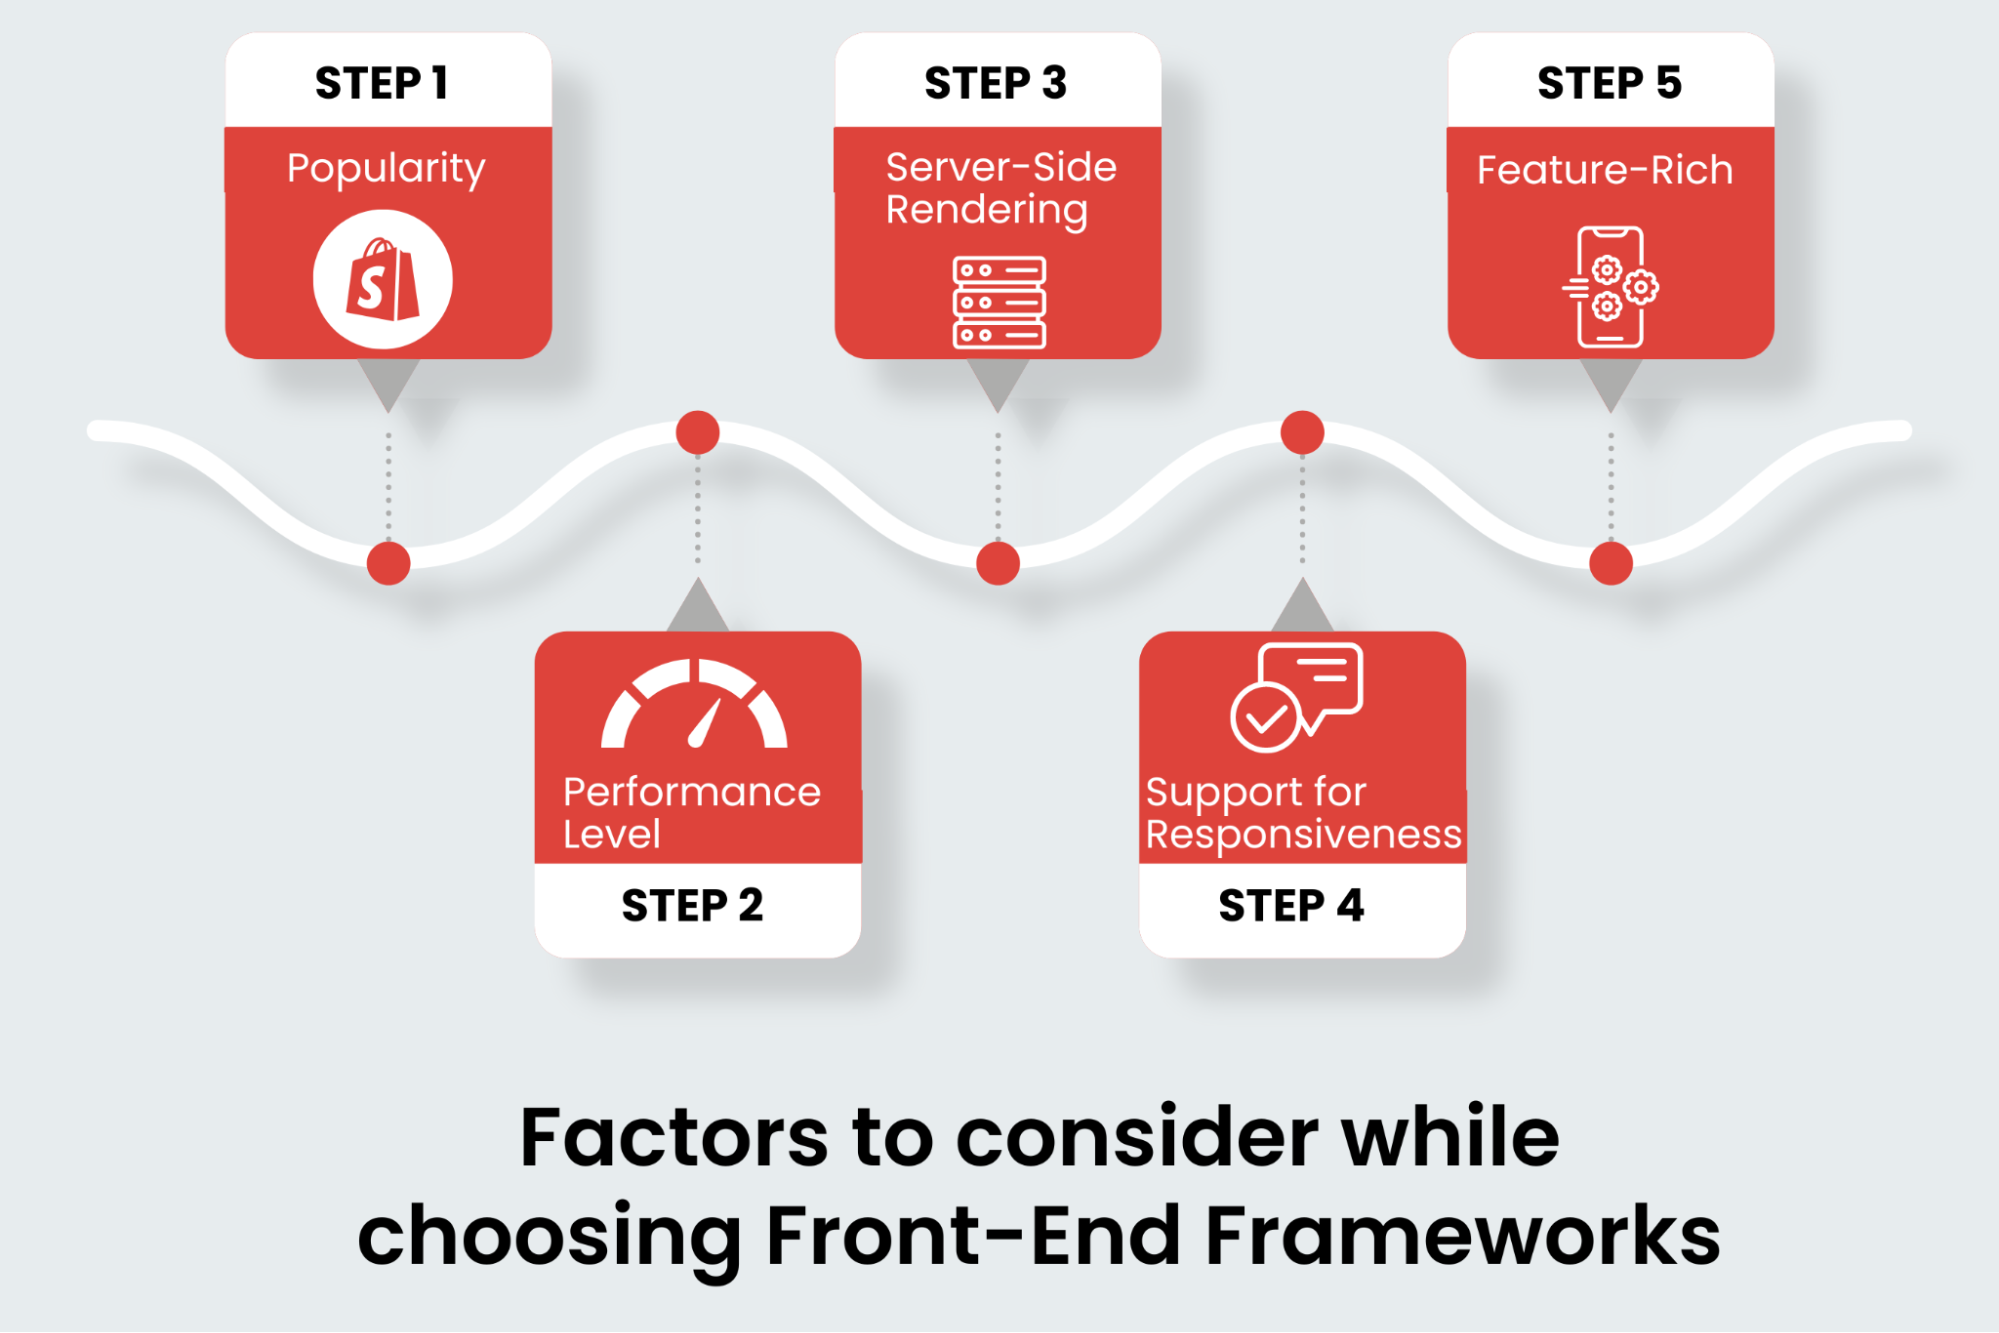 Factors to consider while choosing Front-End Frameworks